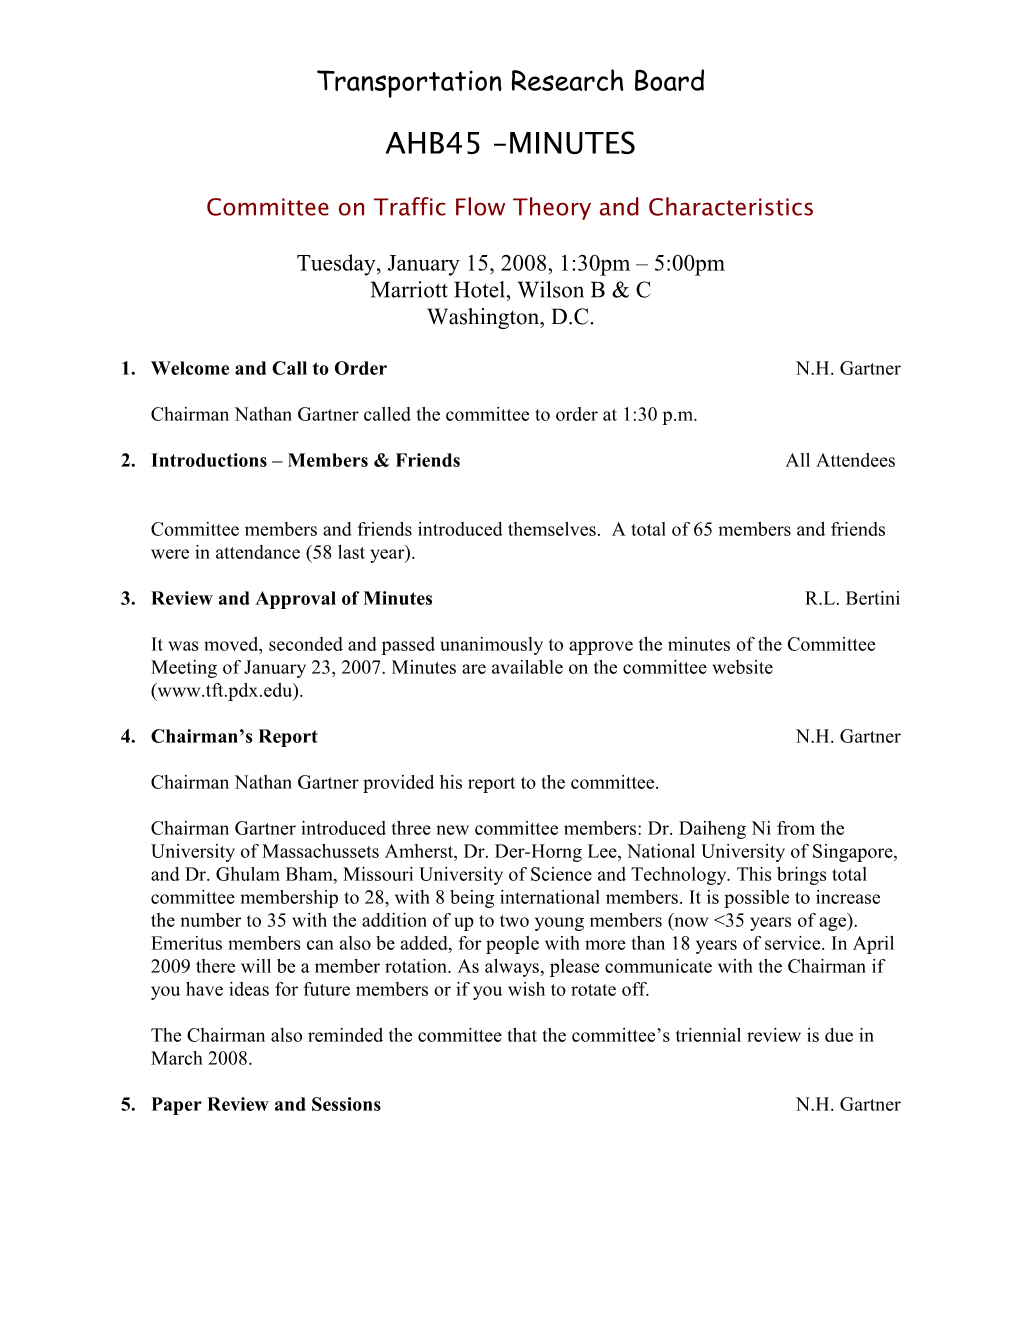 Committee on Traffic Flow Theory and Characteristics